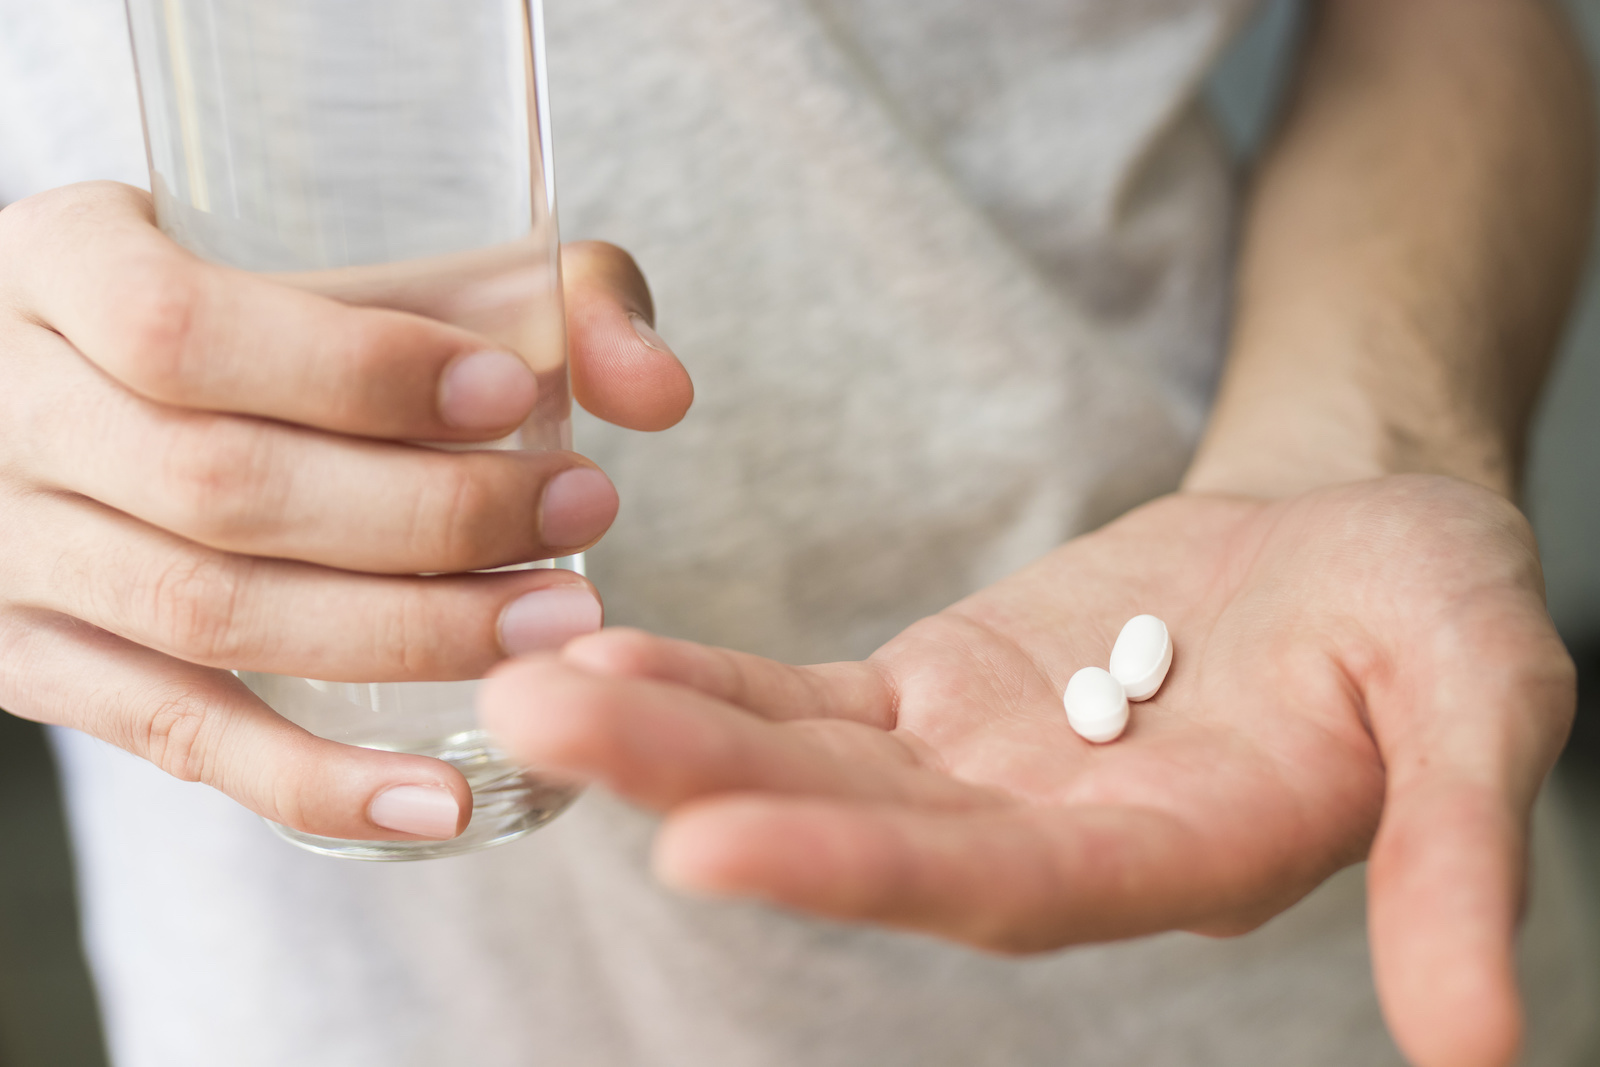 Hydrocodone Addiction: Side Effects, Withdrawal Symptoms, and How to Get Help